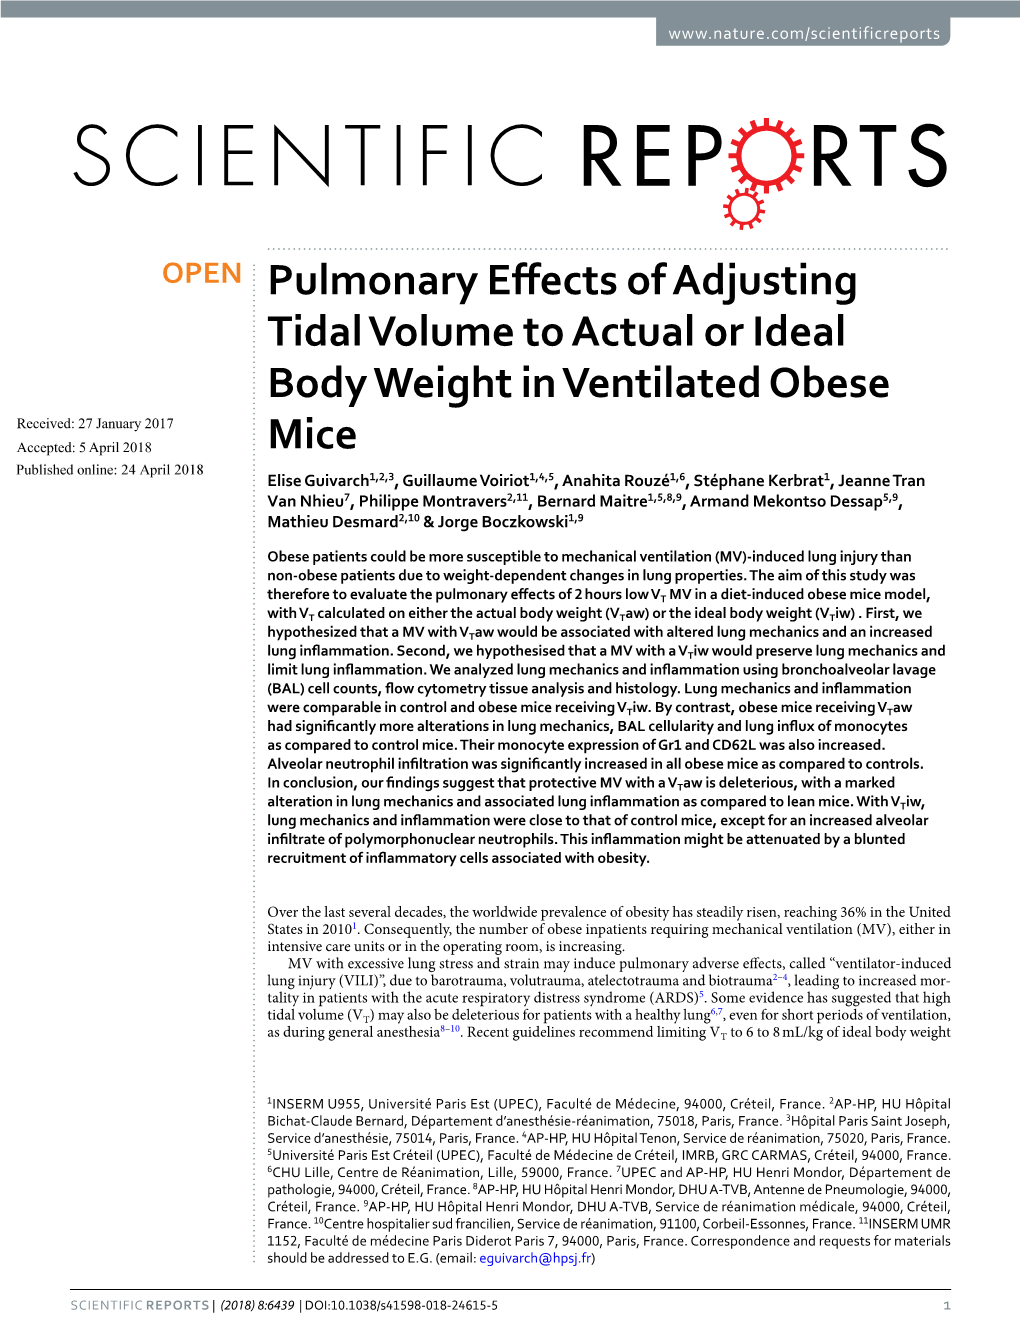 Pulmonary Effects of Adjusting Tidal Volume to Actual Or Ideal Body